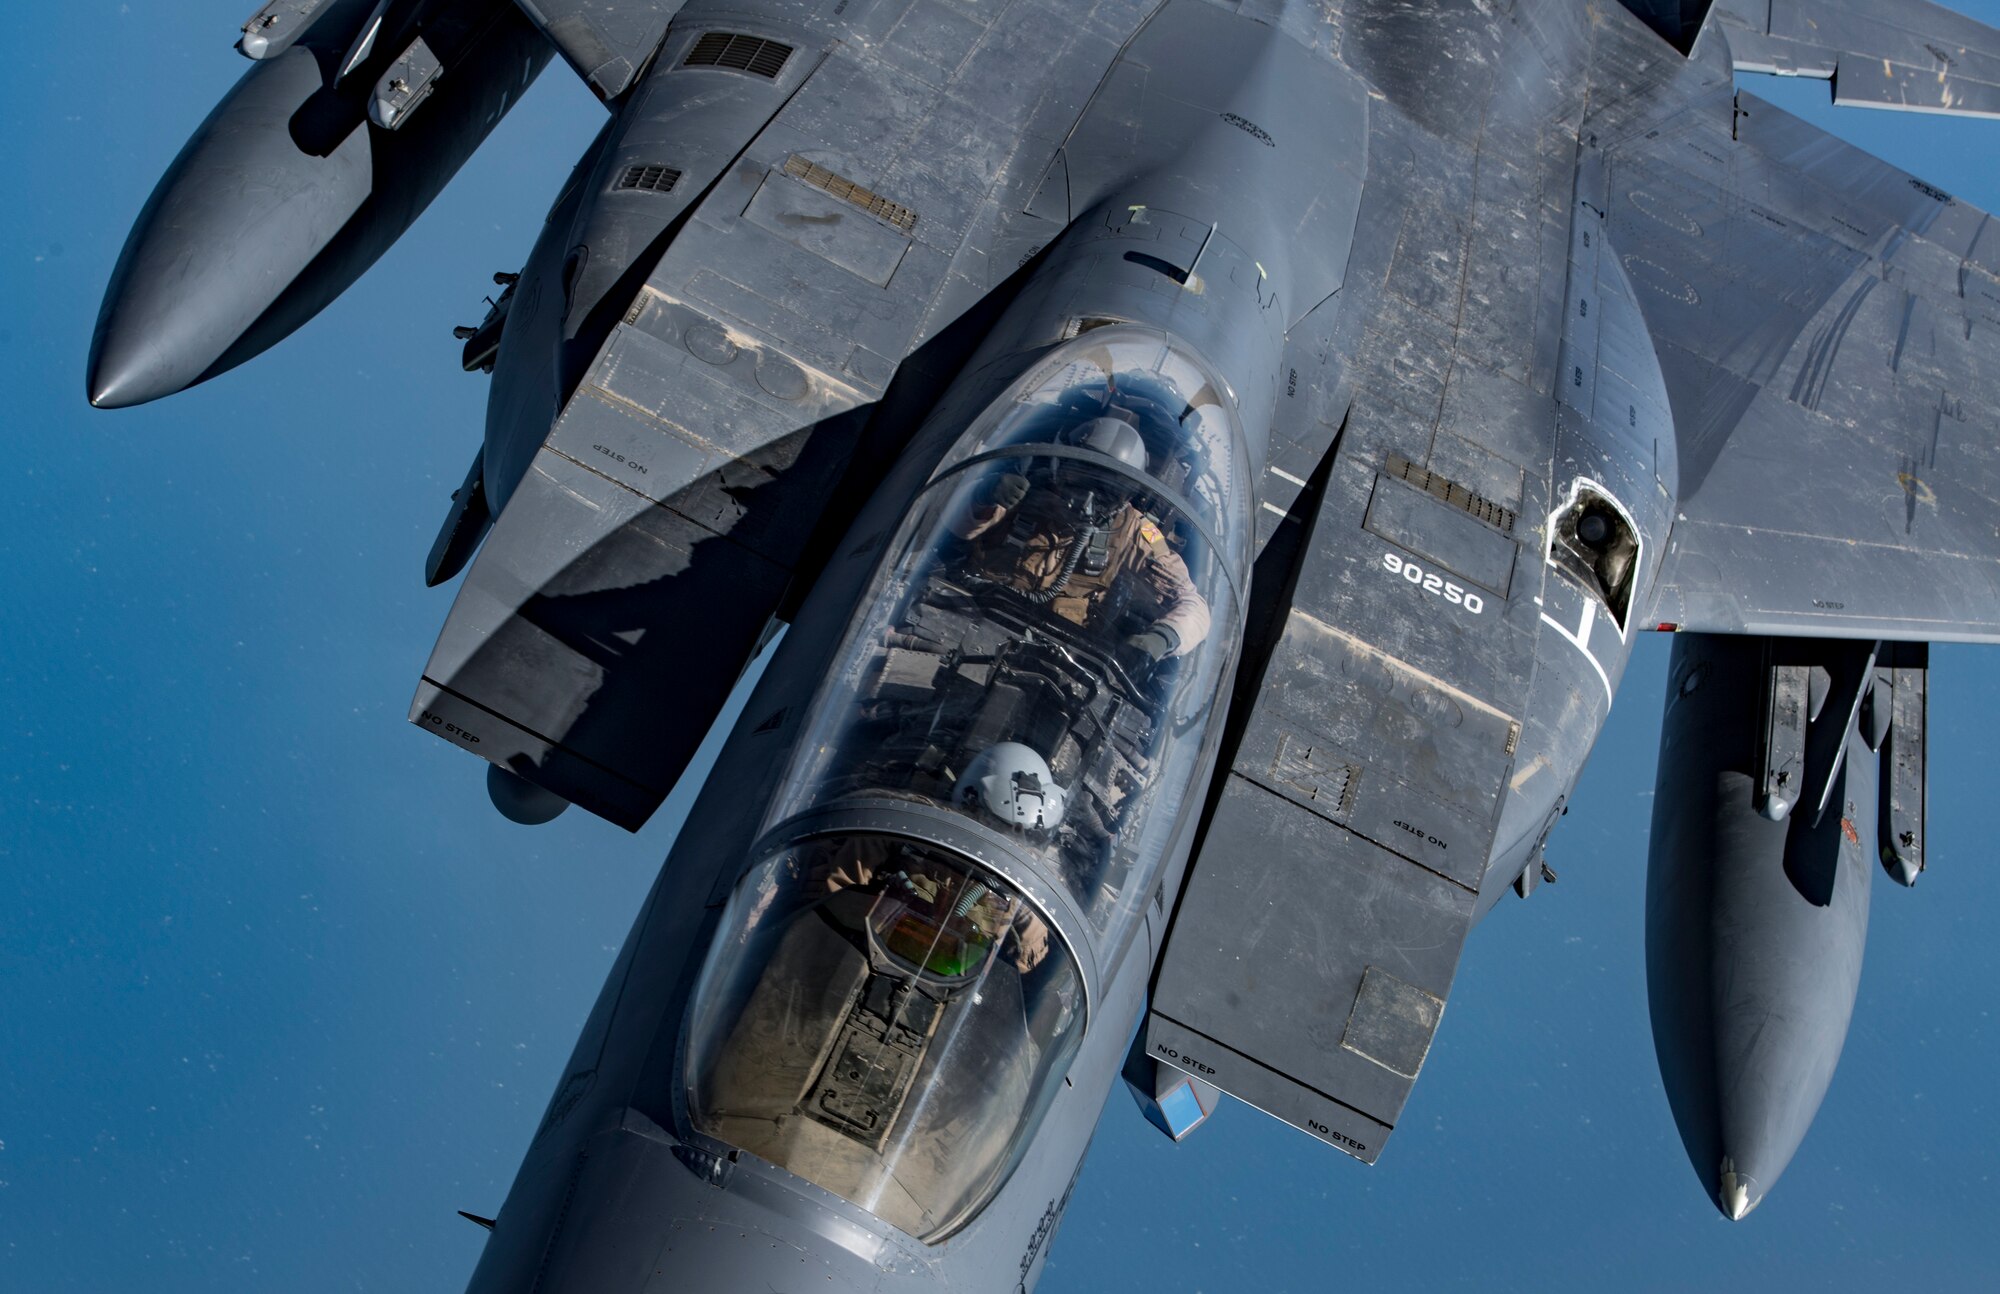 A weapon systems officer gives a “thumbs-up” in a U.S. Air Force F-15E Strike Eagle after aerial refueling provided by a KC-135 Stratotanker during Joint Air Defense Exercise 19-01, Feb. 19, 2019. The aircraft participated with regional partners to test objective-based command and control actions during the exercise. (U.S. Air Force photo by Staff Sgt. Clayton Cupit)